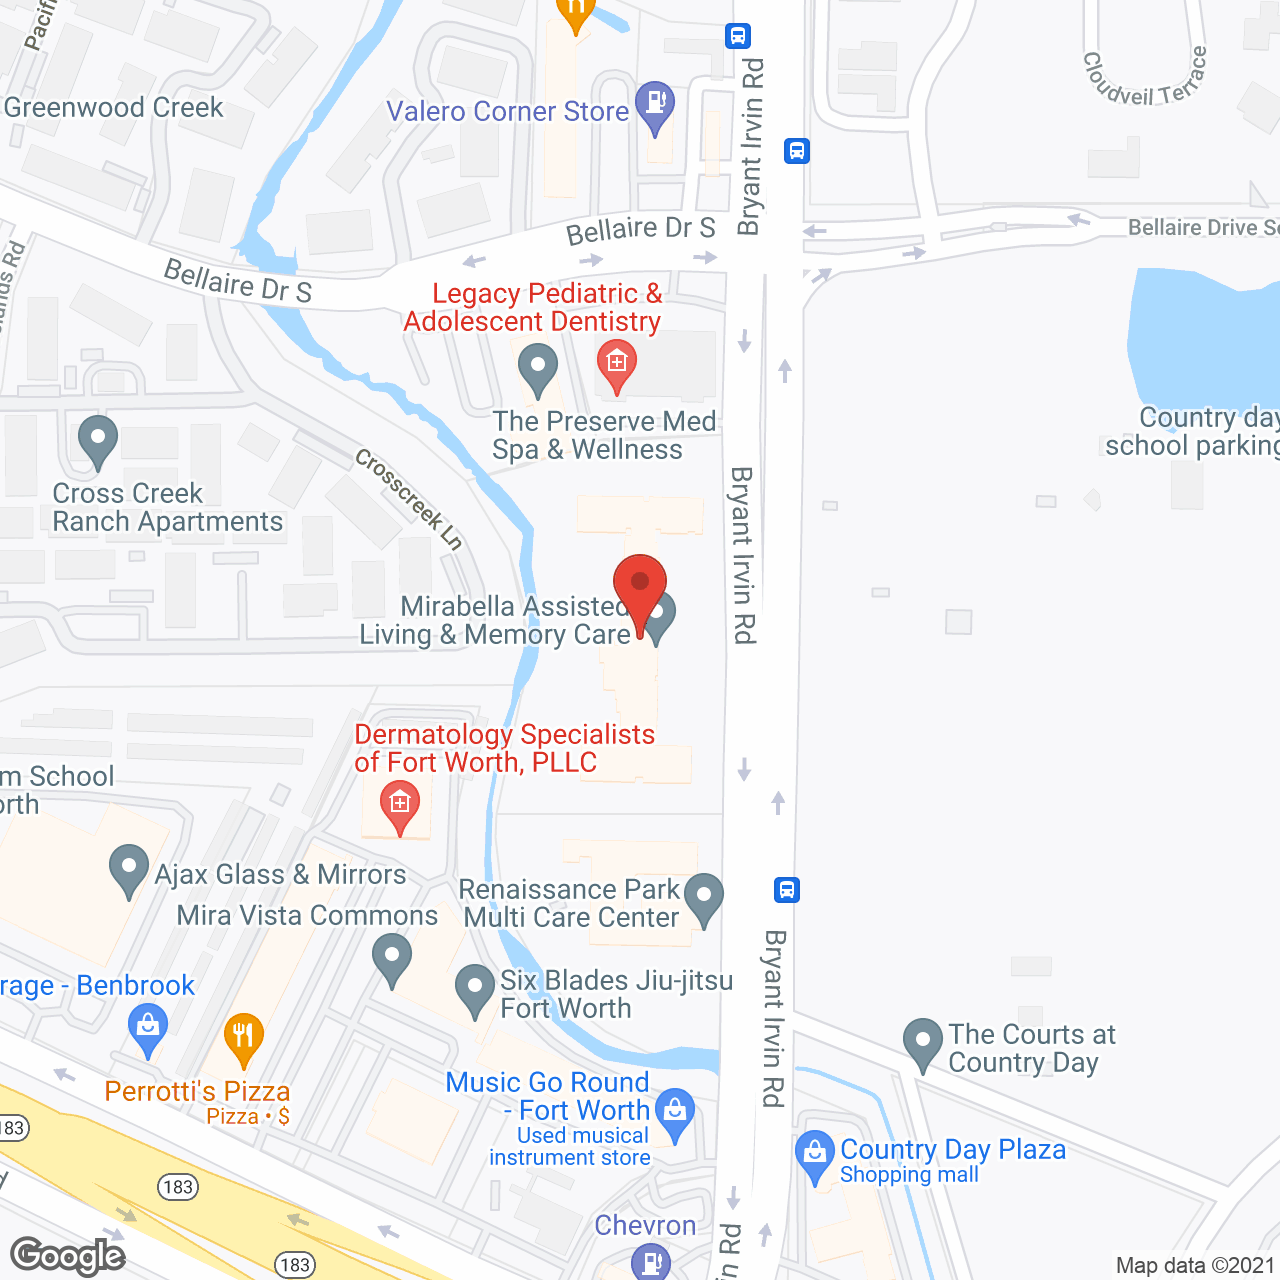 Mirabella Assisted Living and Memory Care in google map